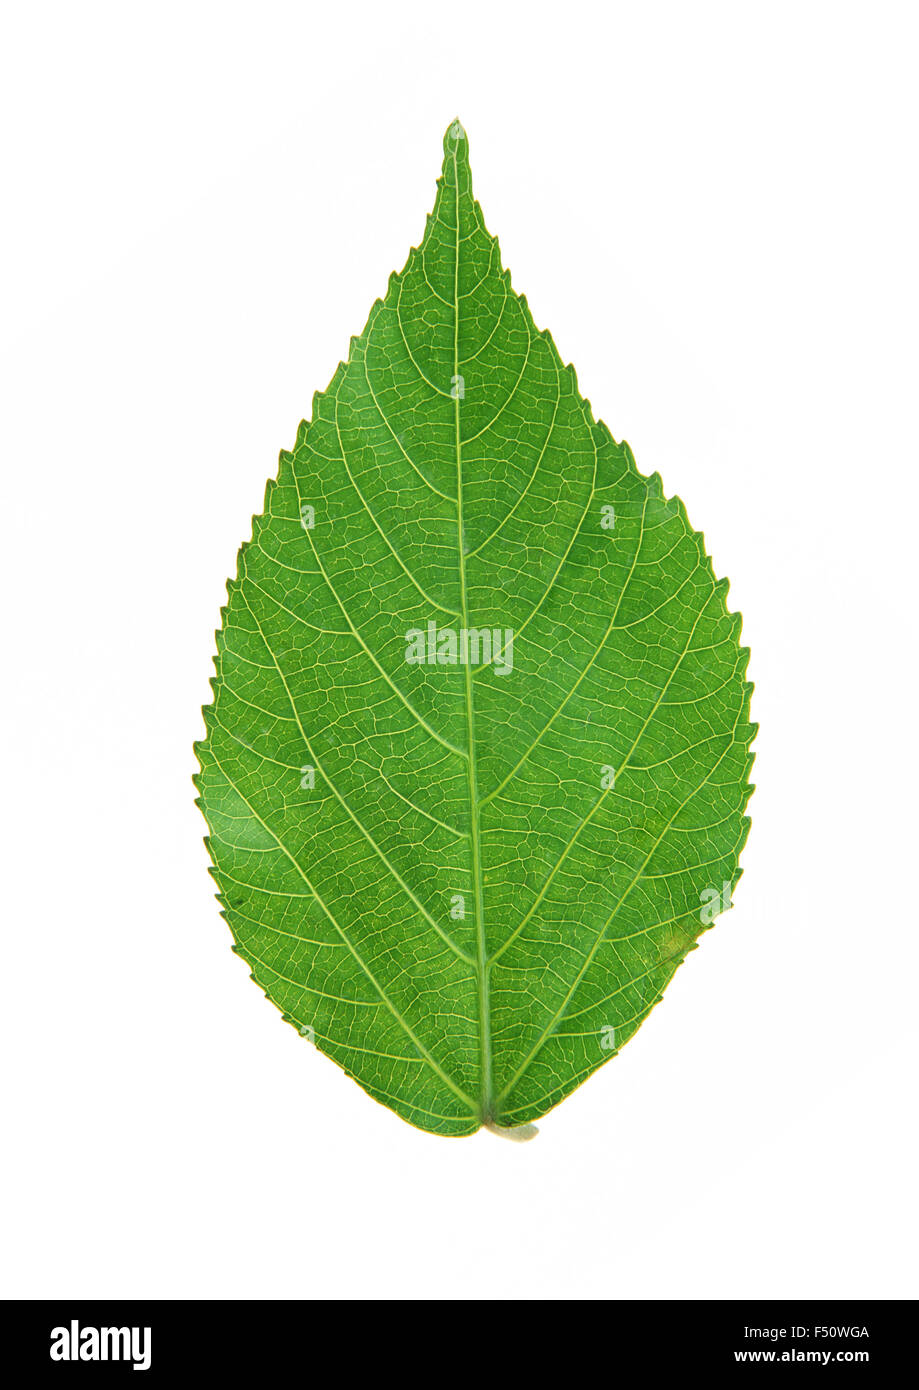 Single green leaf with strips closeup Stock Photo